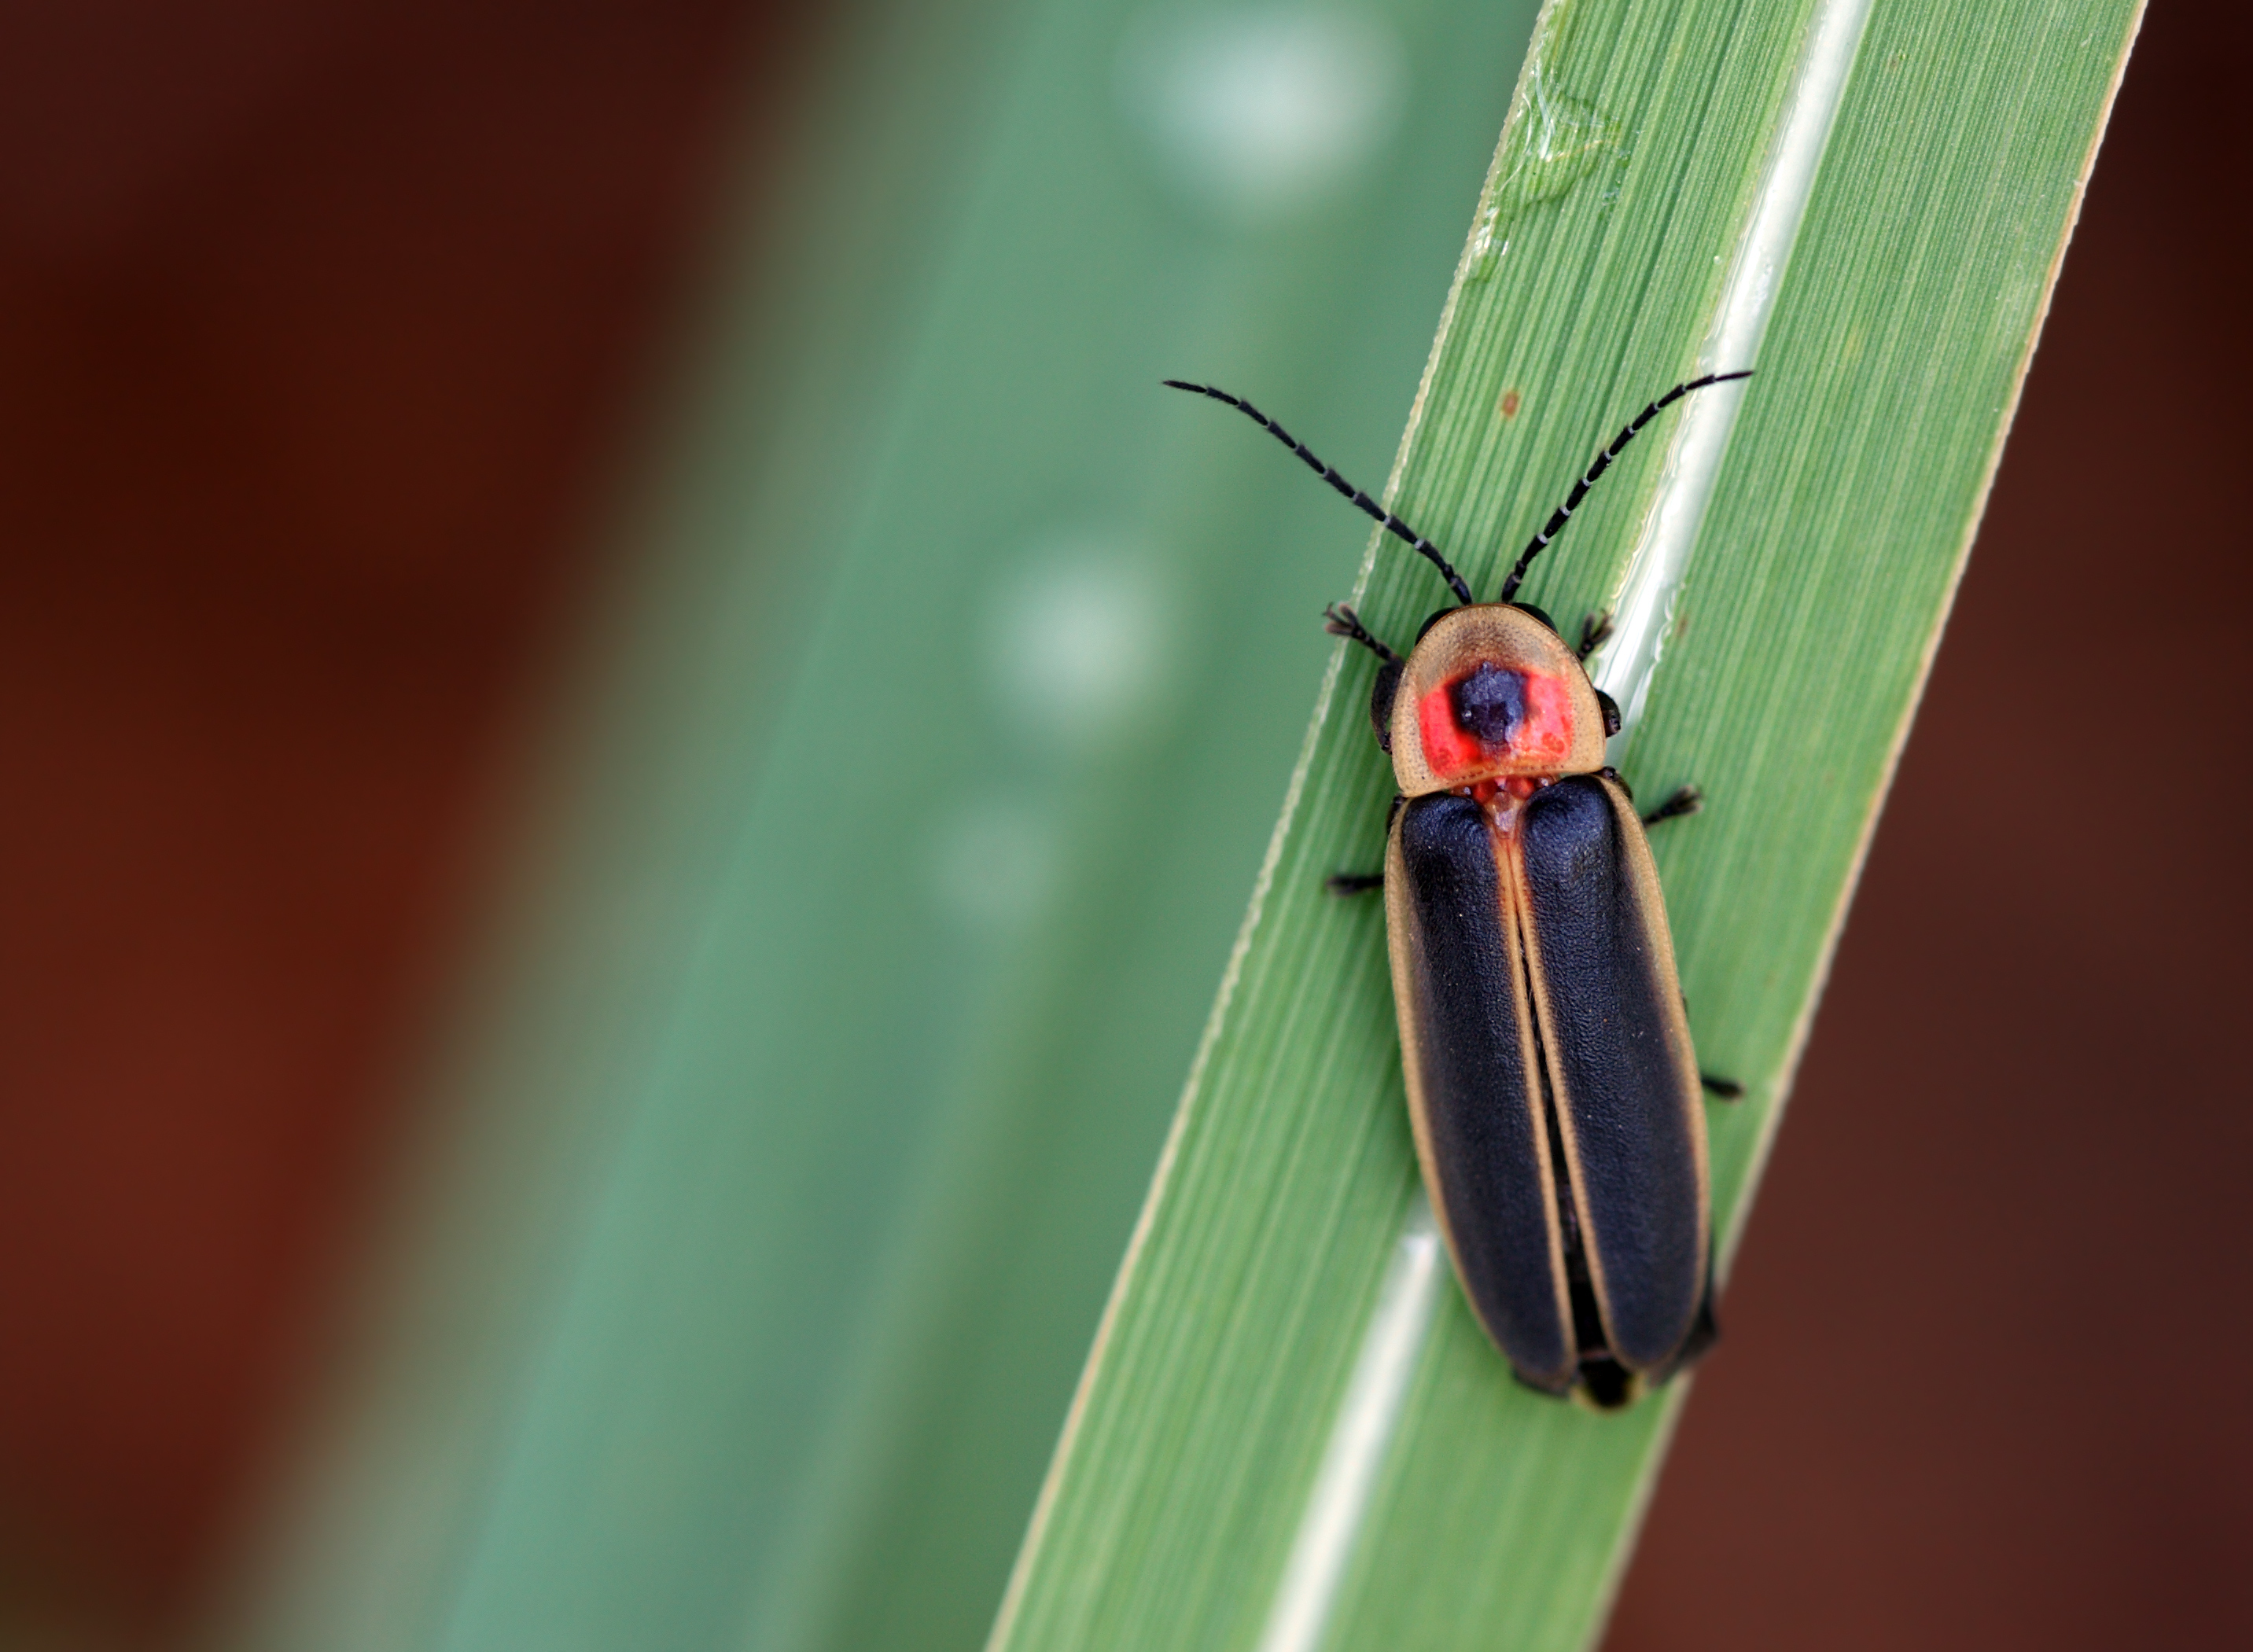 Closeup of firefly or lightning bug on blade of grass